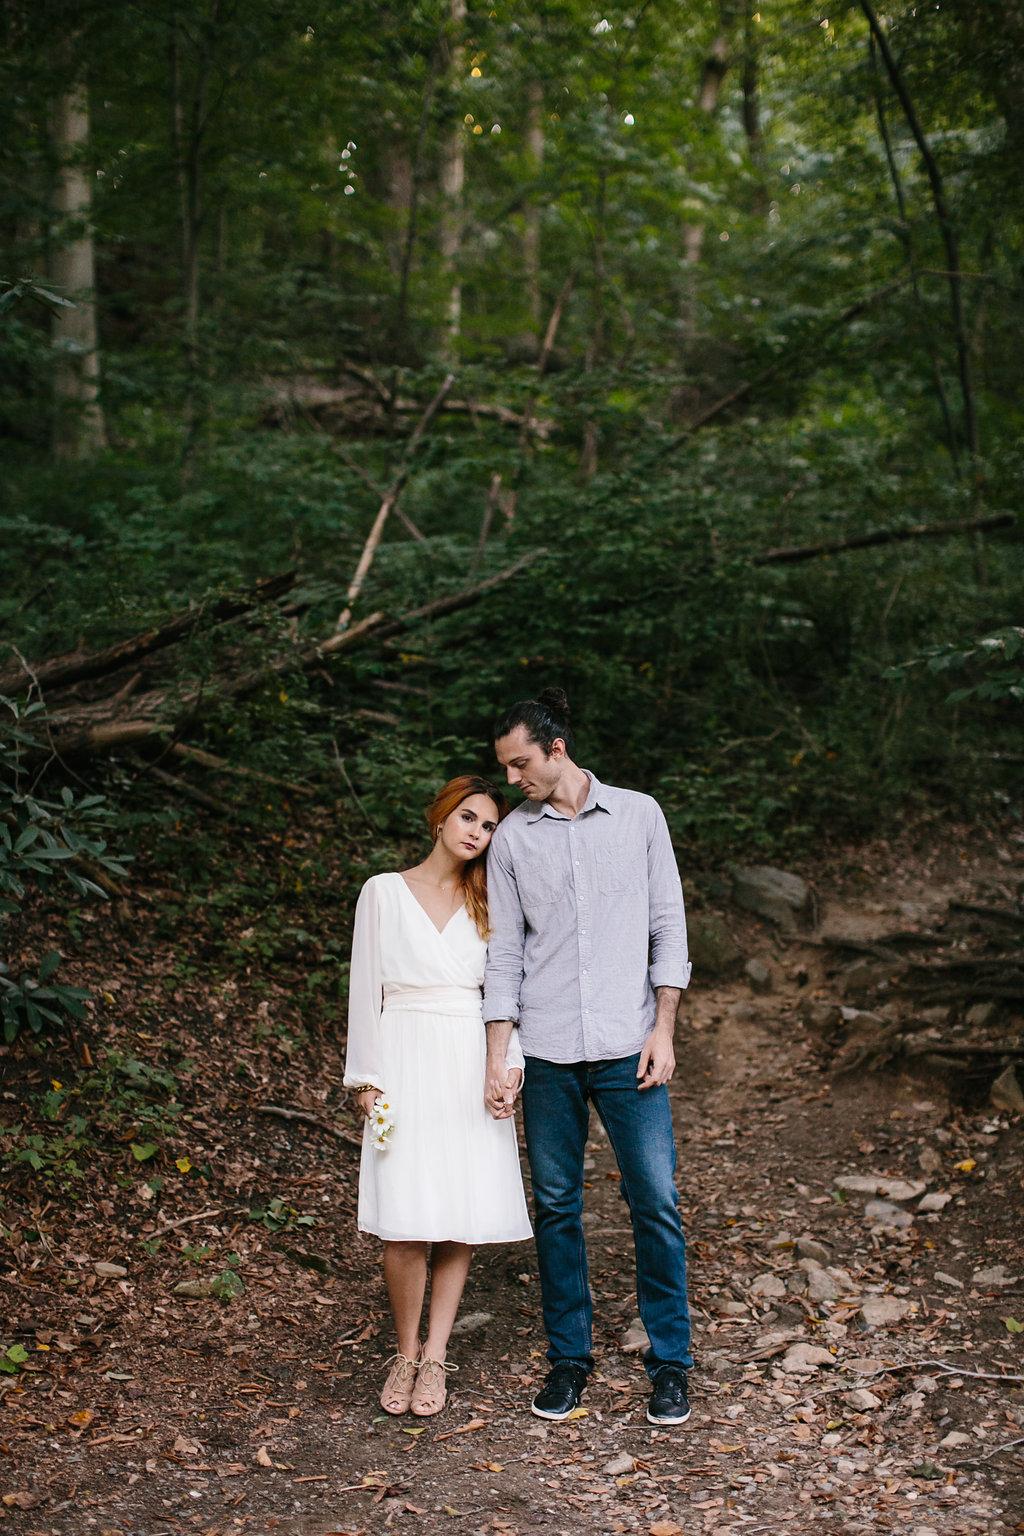 Rustic Styled Proposal in Wissahickon Valley Park L Priori Jewelry Proposal Philadelphia Wedding Ring Philly In Love Philadelphia Weddings